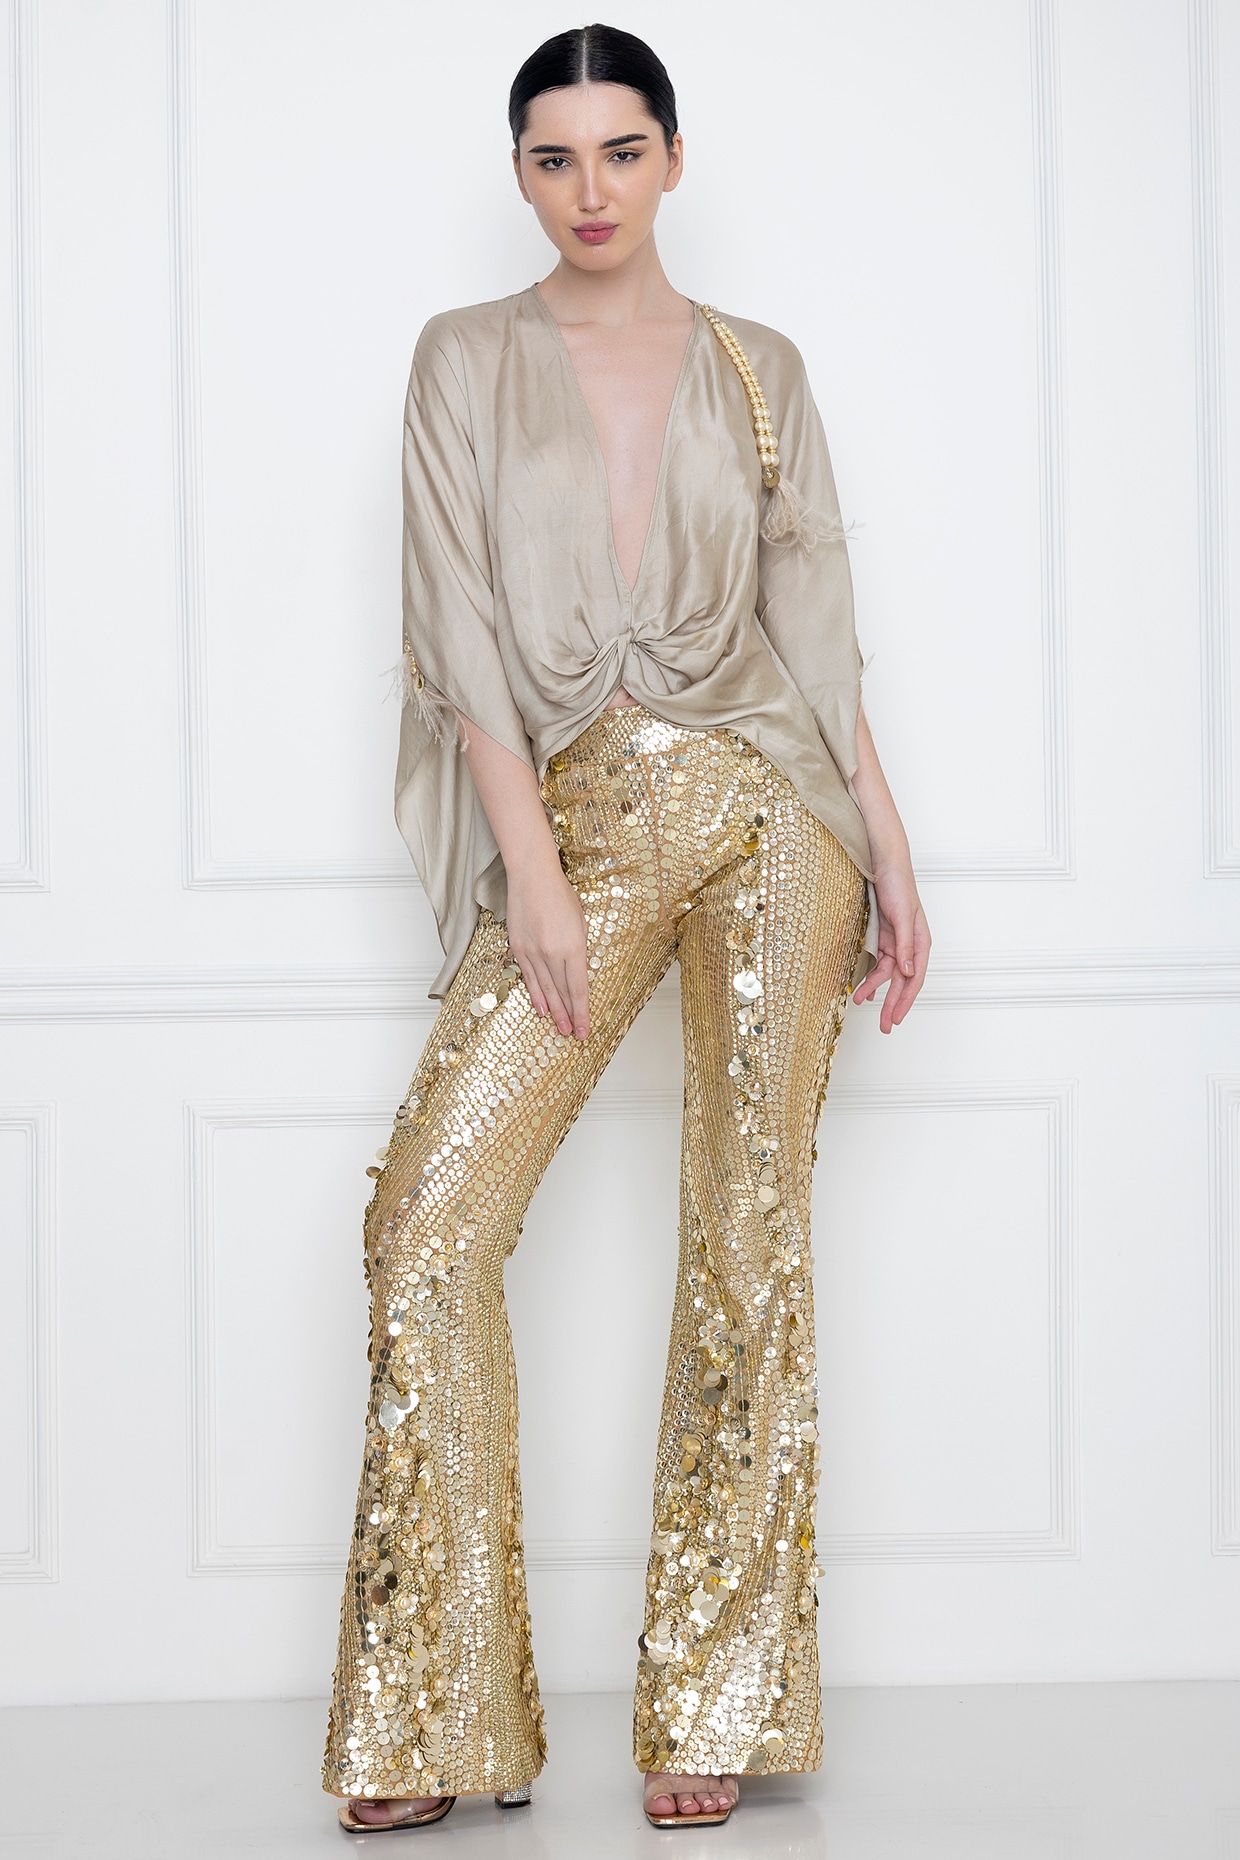 Reflections Of Bronze Sequin Pants  Sequin pants Fashion Sequin outfit